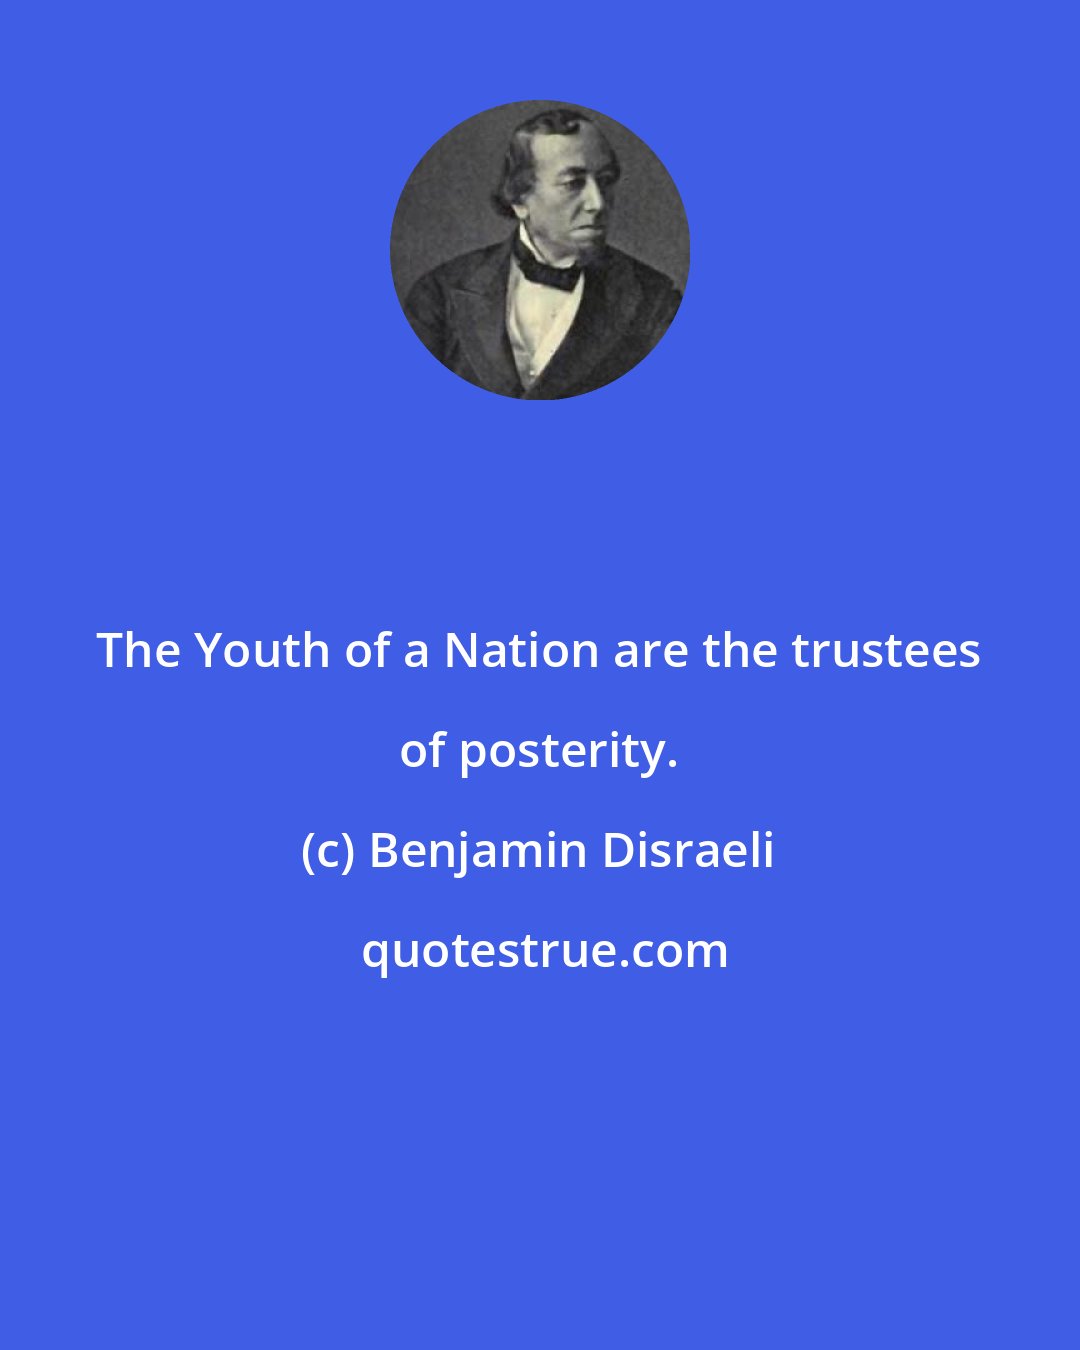 Benjamin Disraeli: The Youth of a Nation are the trustees of posterity.